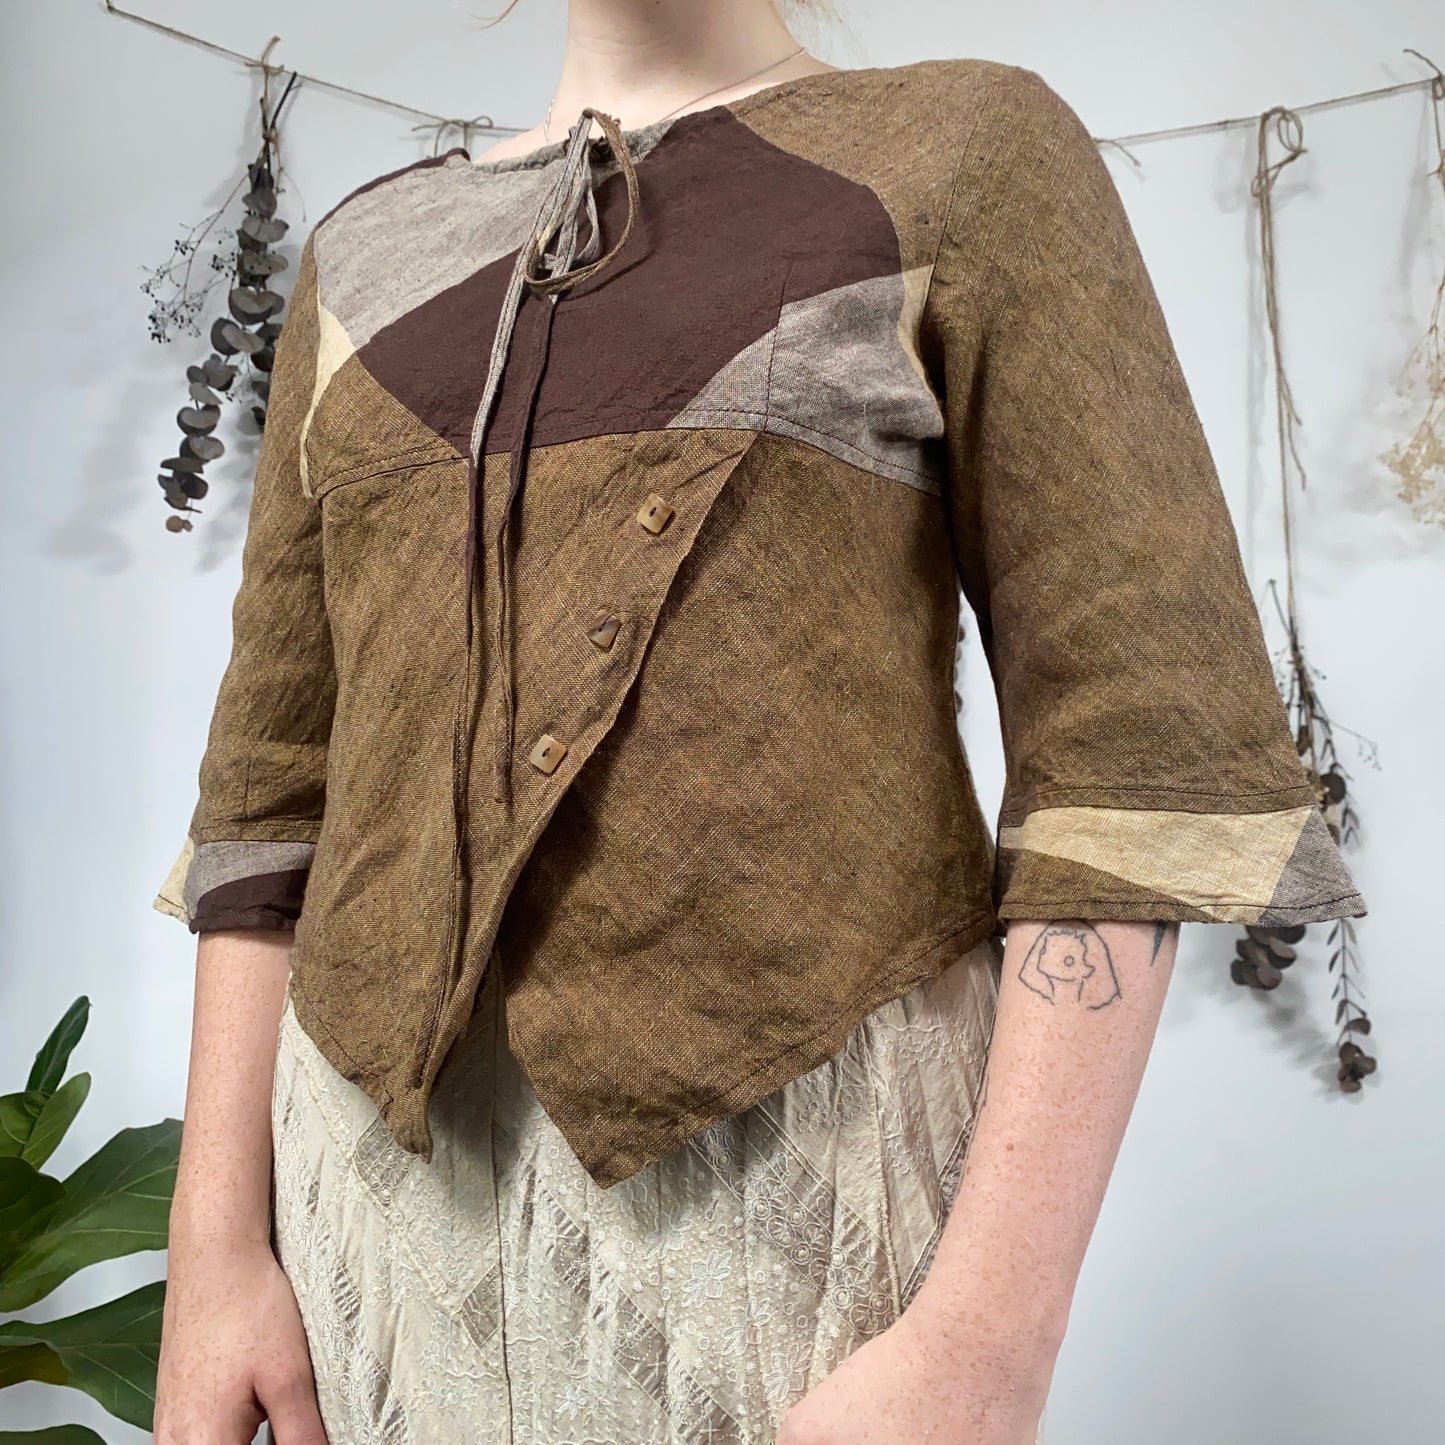 Earthy top - size S/M